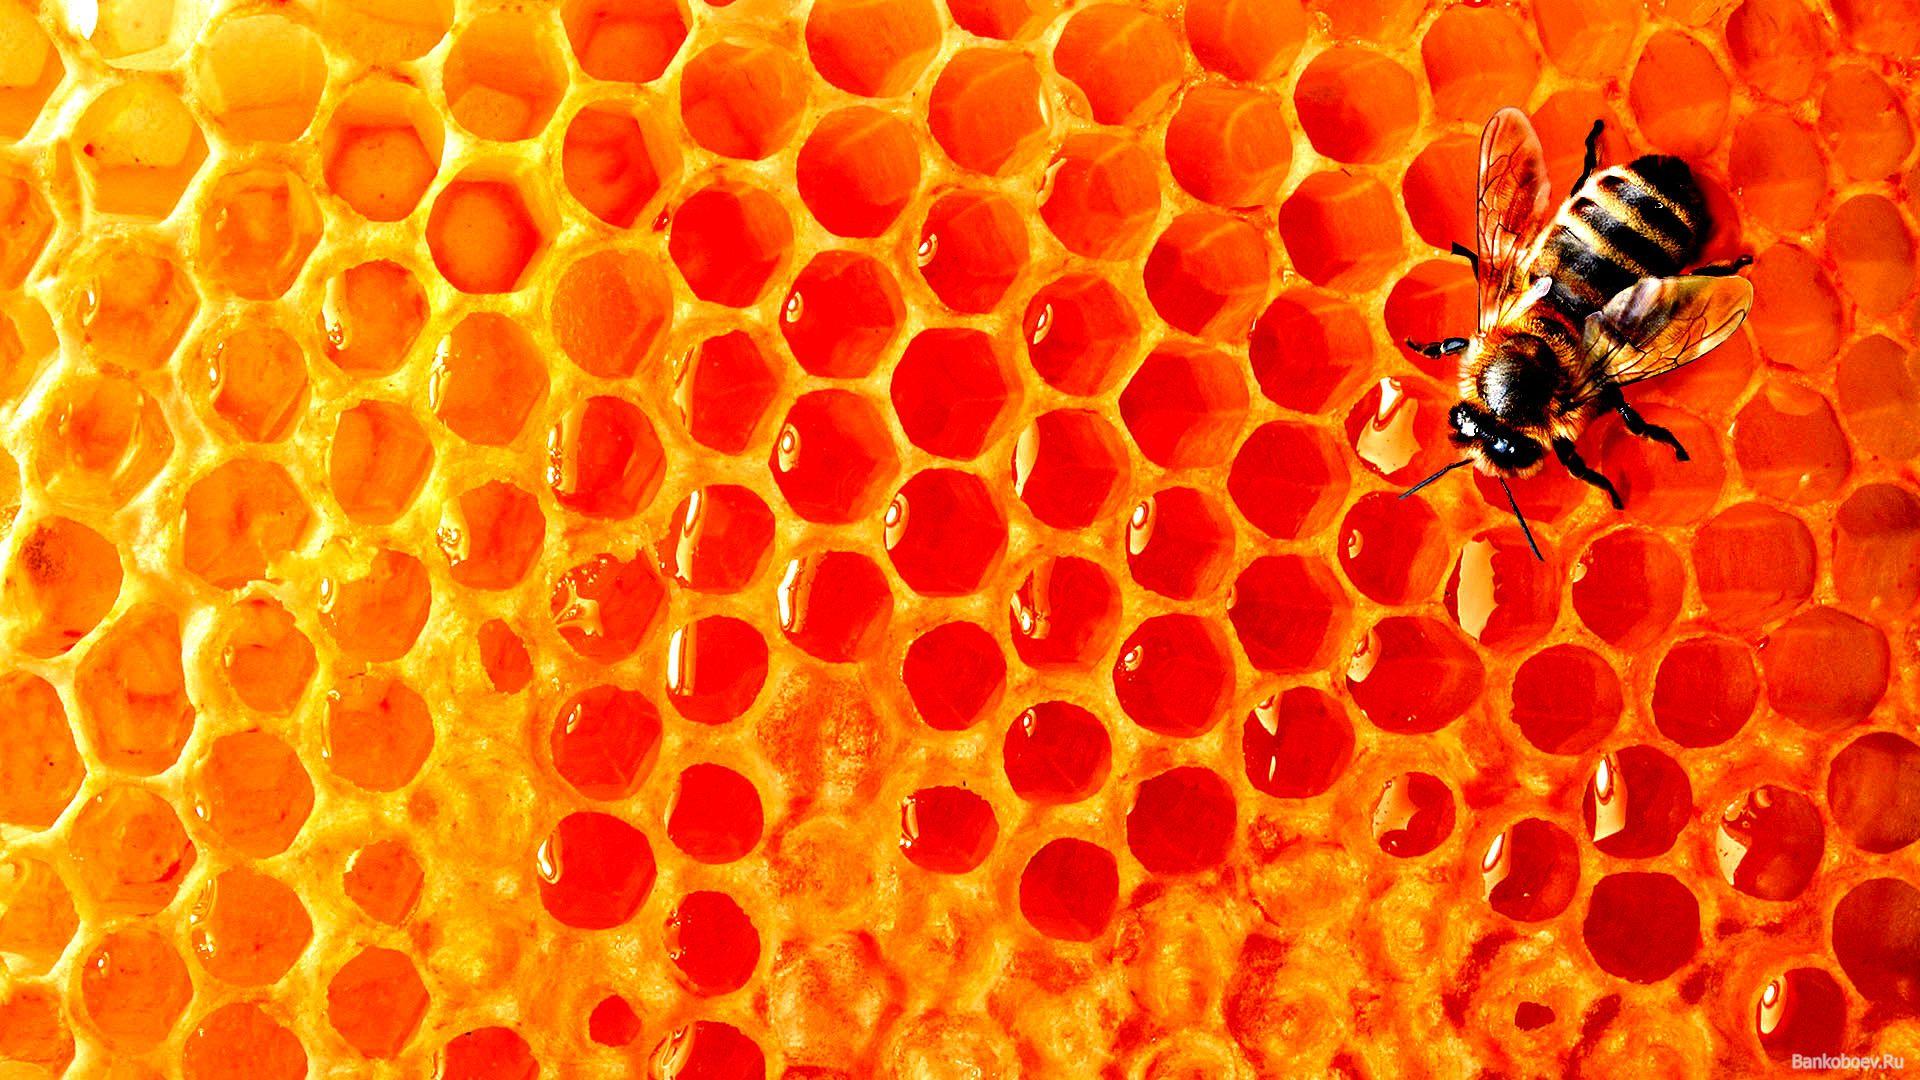 Best Honey Wallpapers in High Quality, Honey Backgrounds